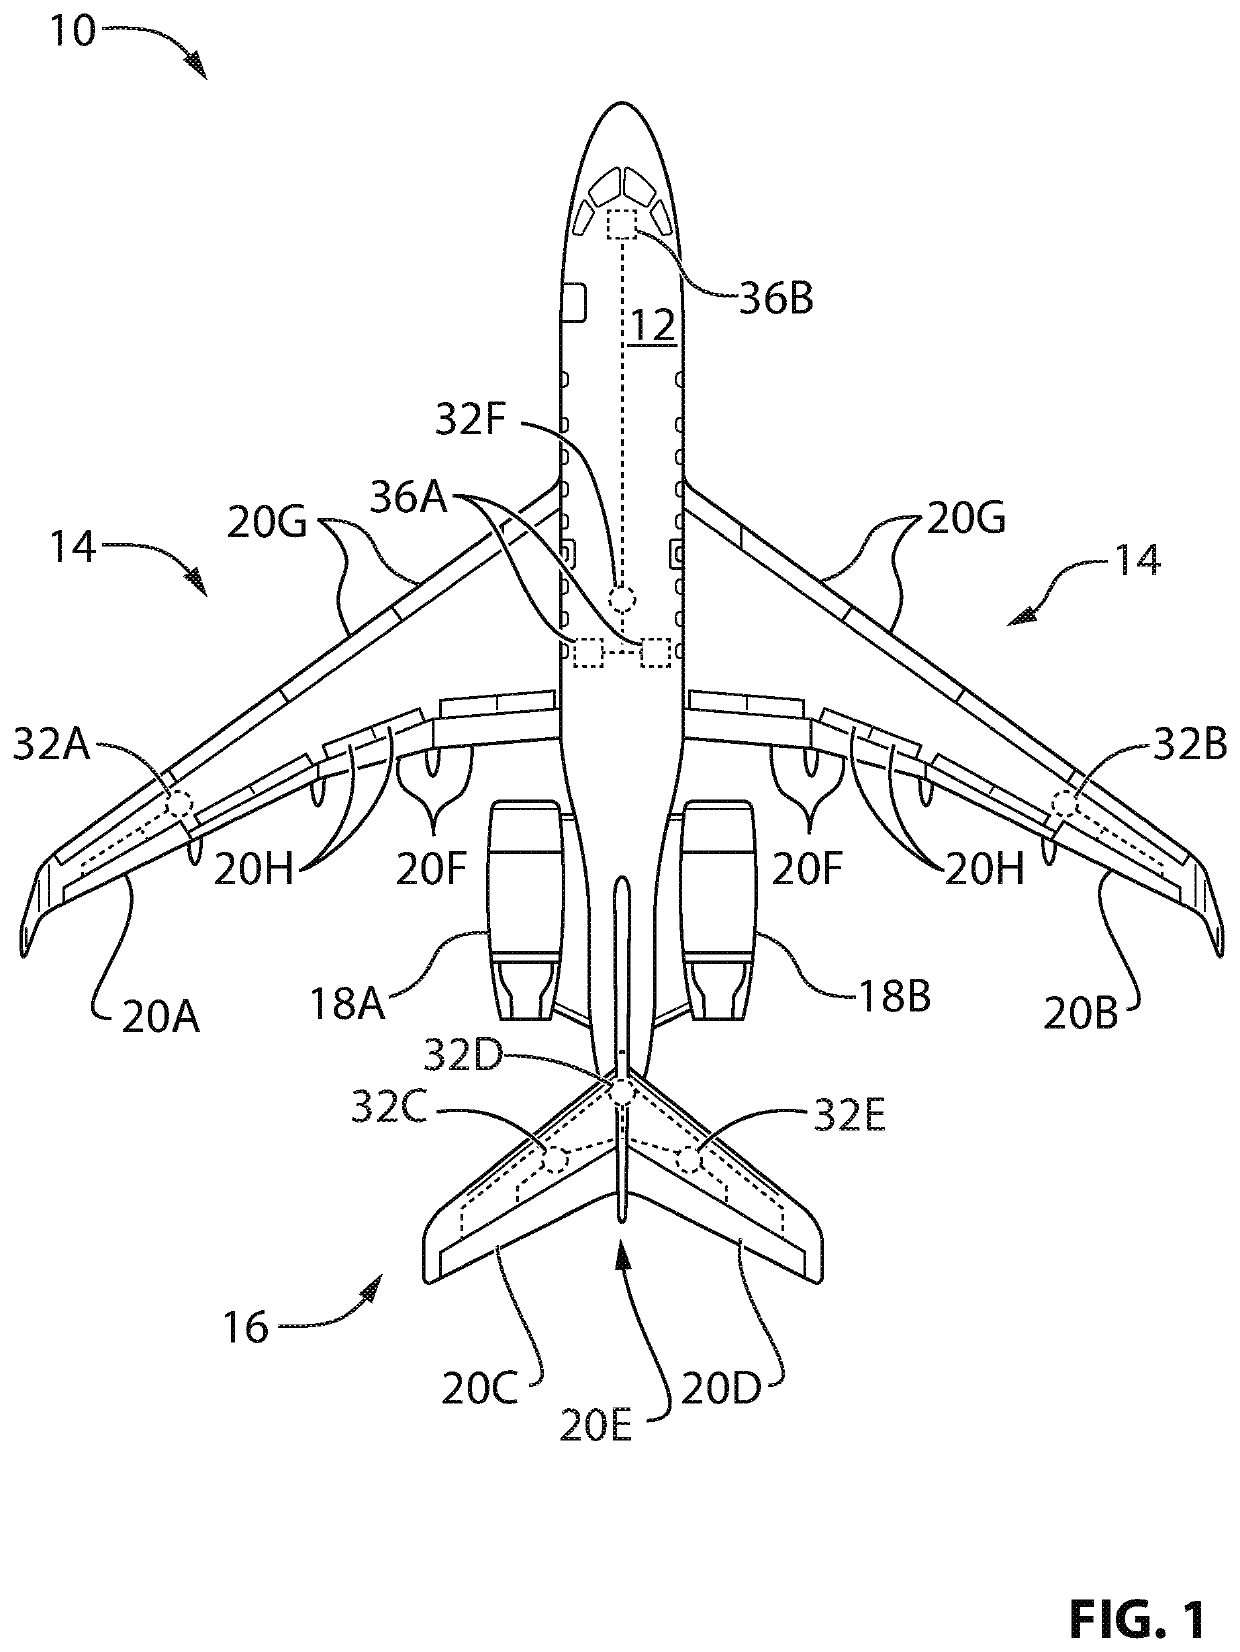 Apparatus and methods for distributing electric power on an aircraft during a limited power availability condition